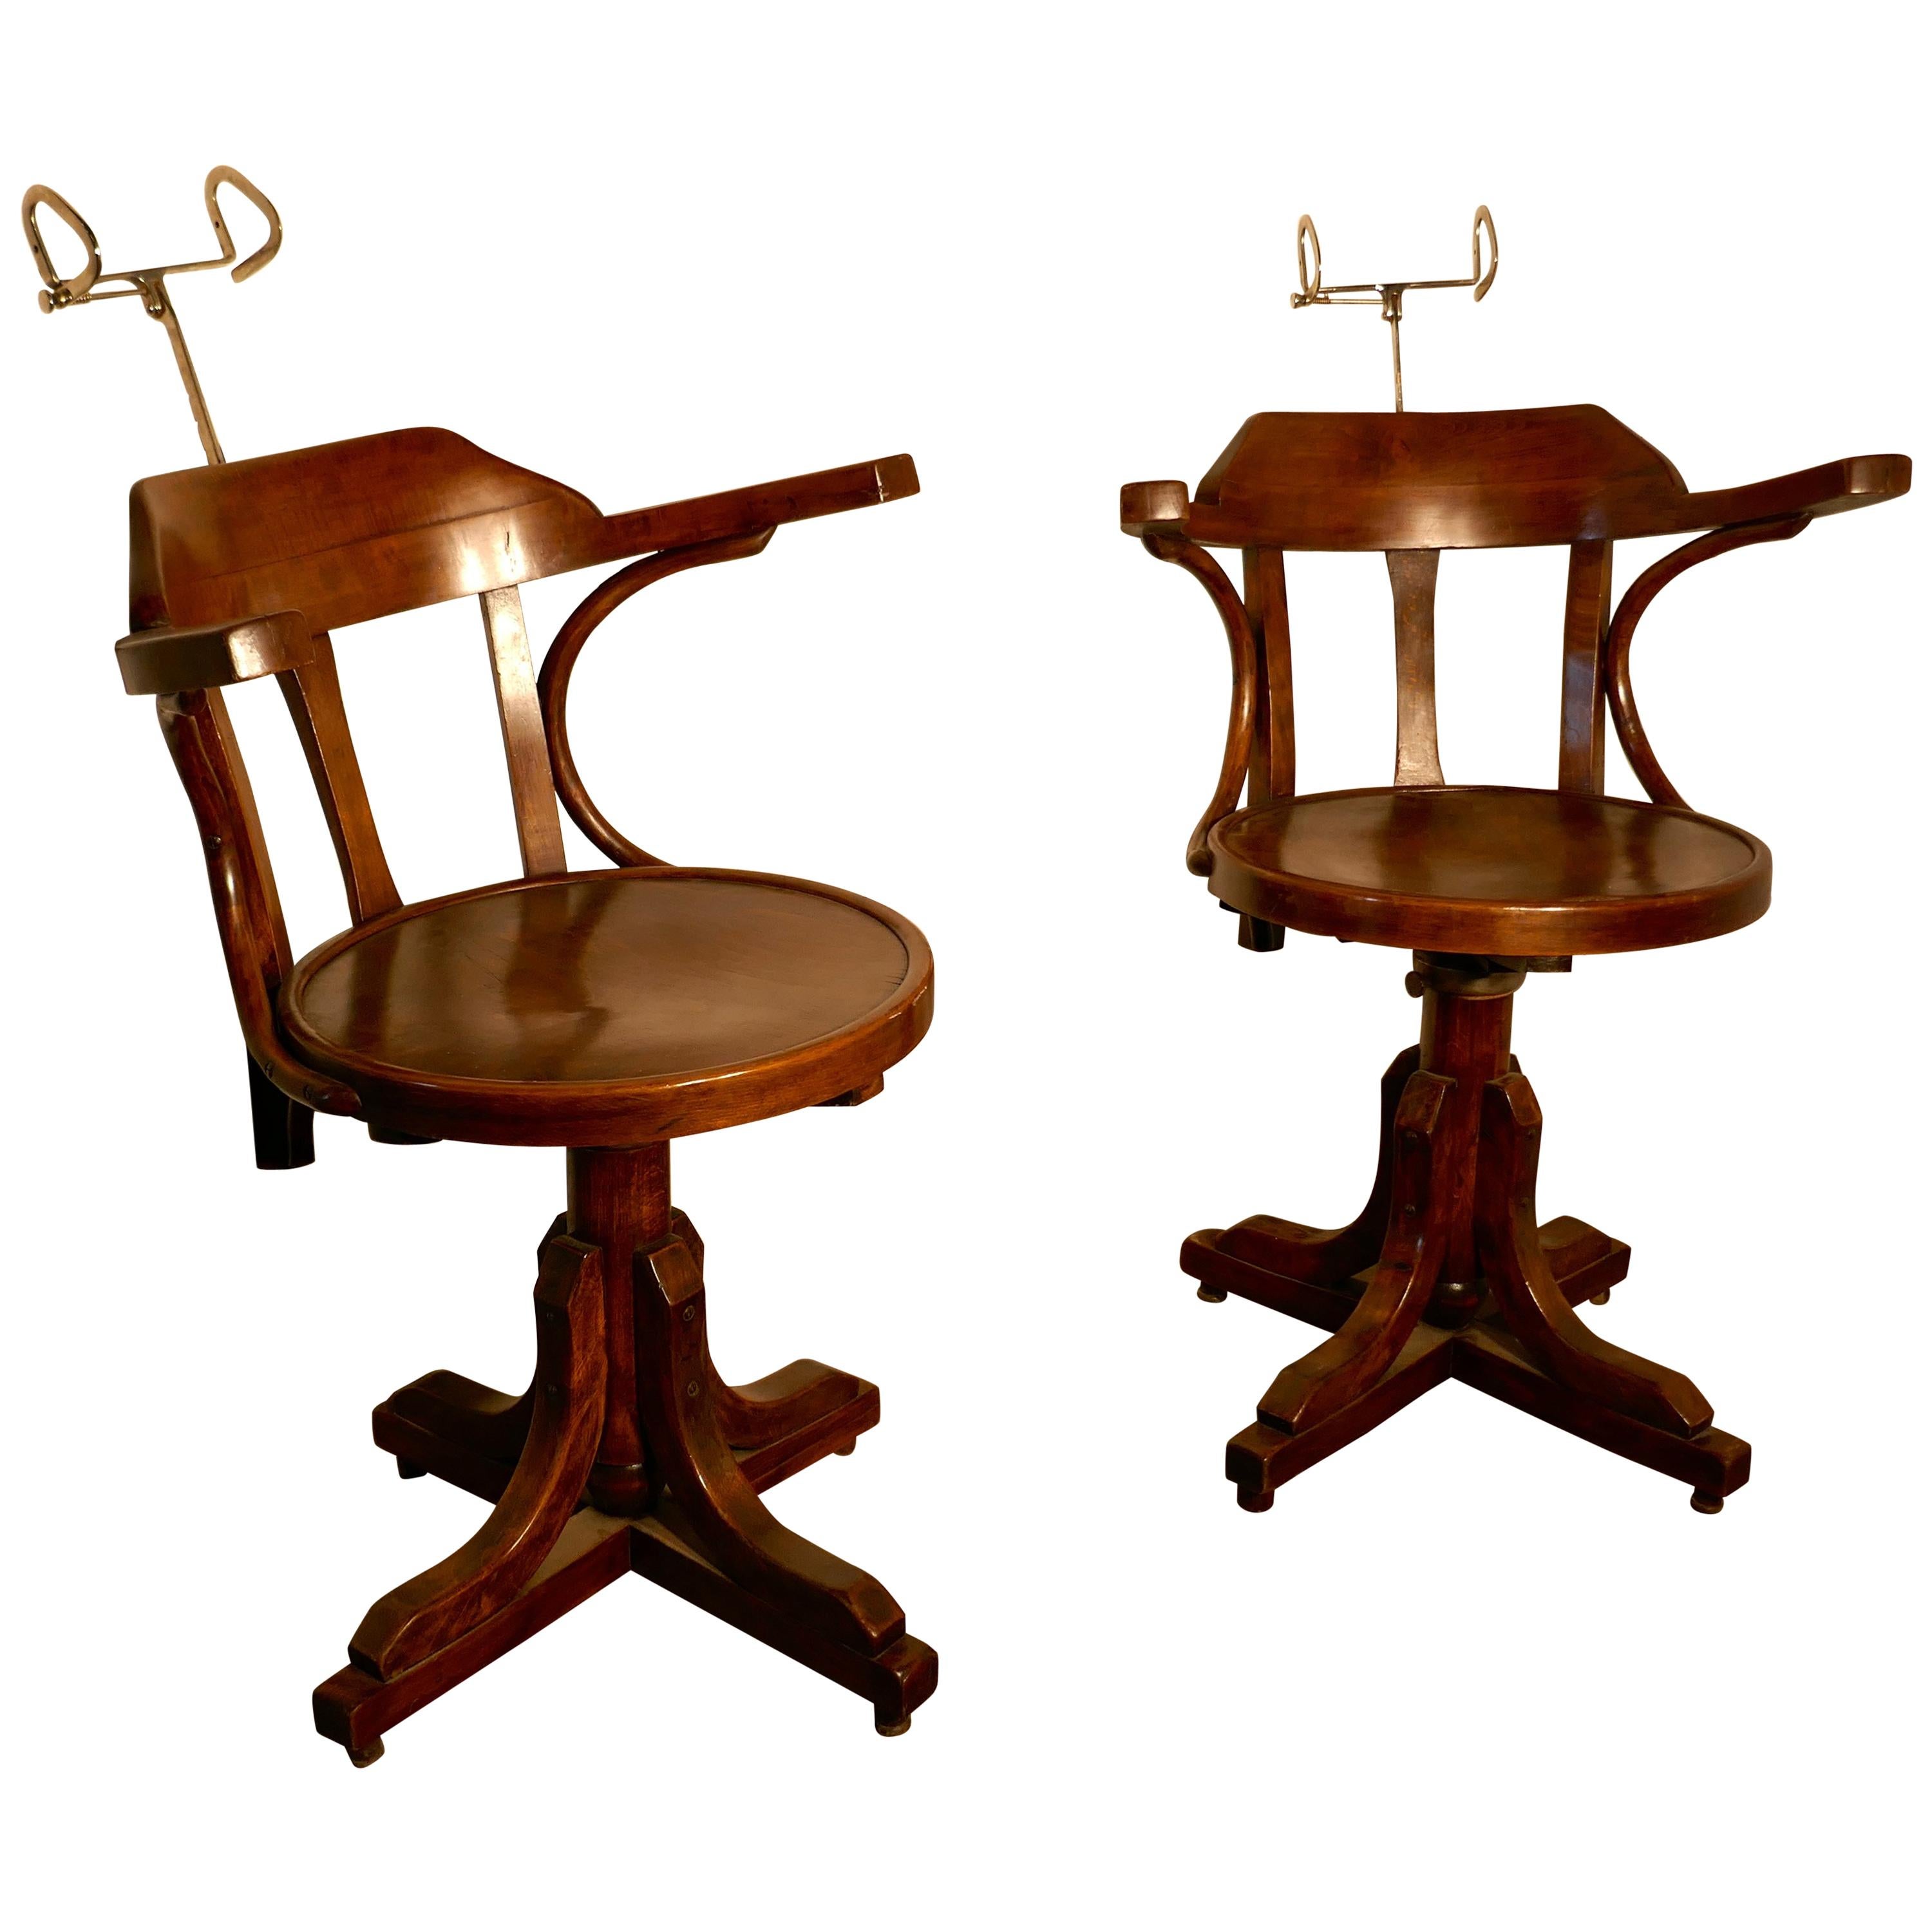 19th Century American Bentwood Barbers’ Chairs